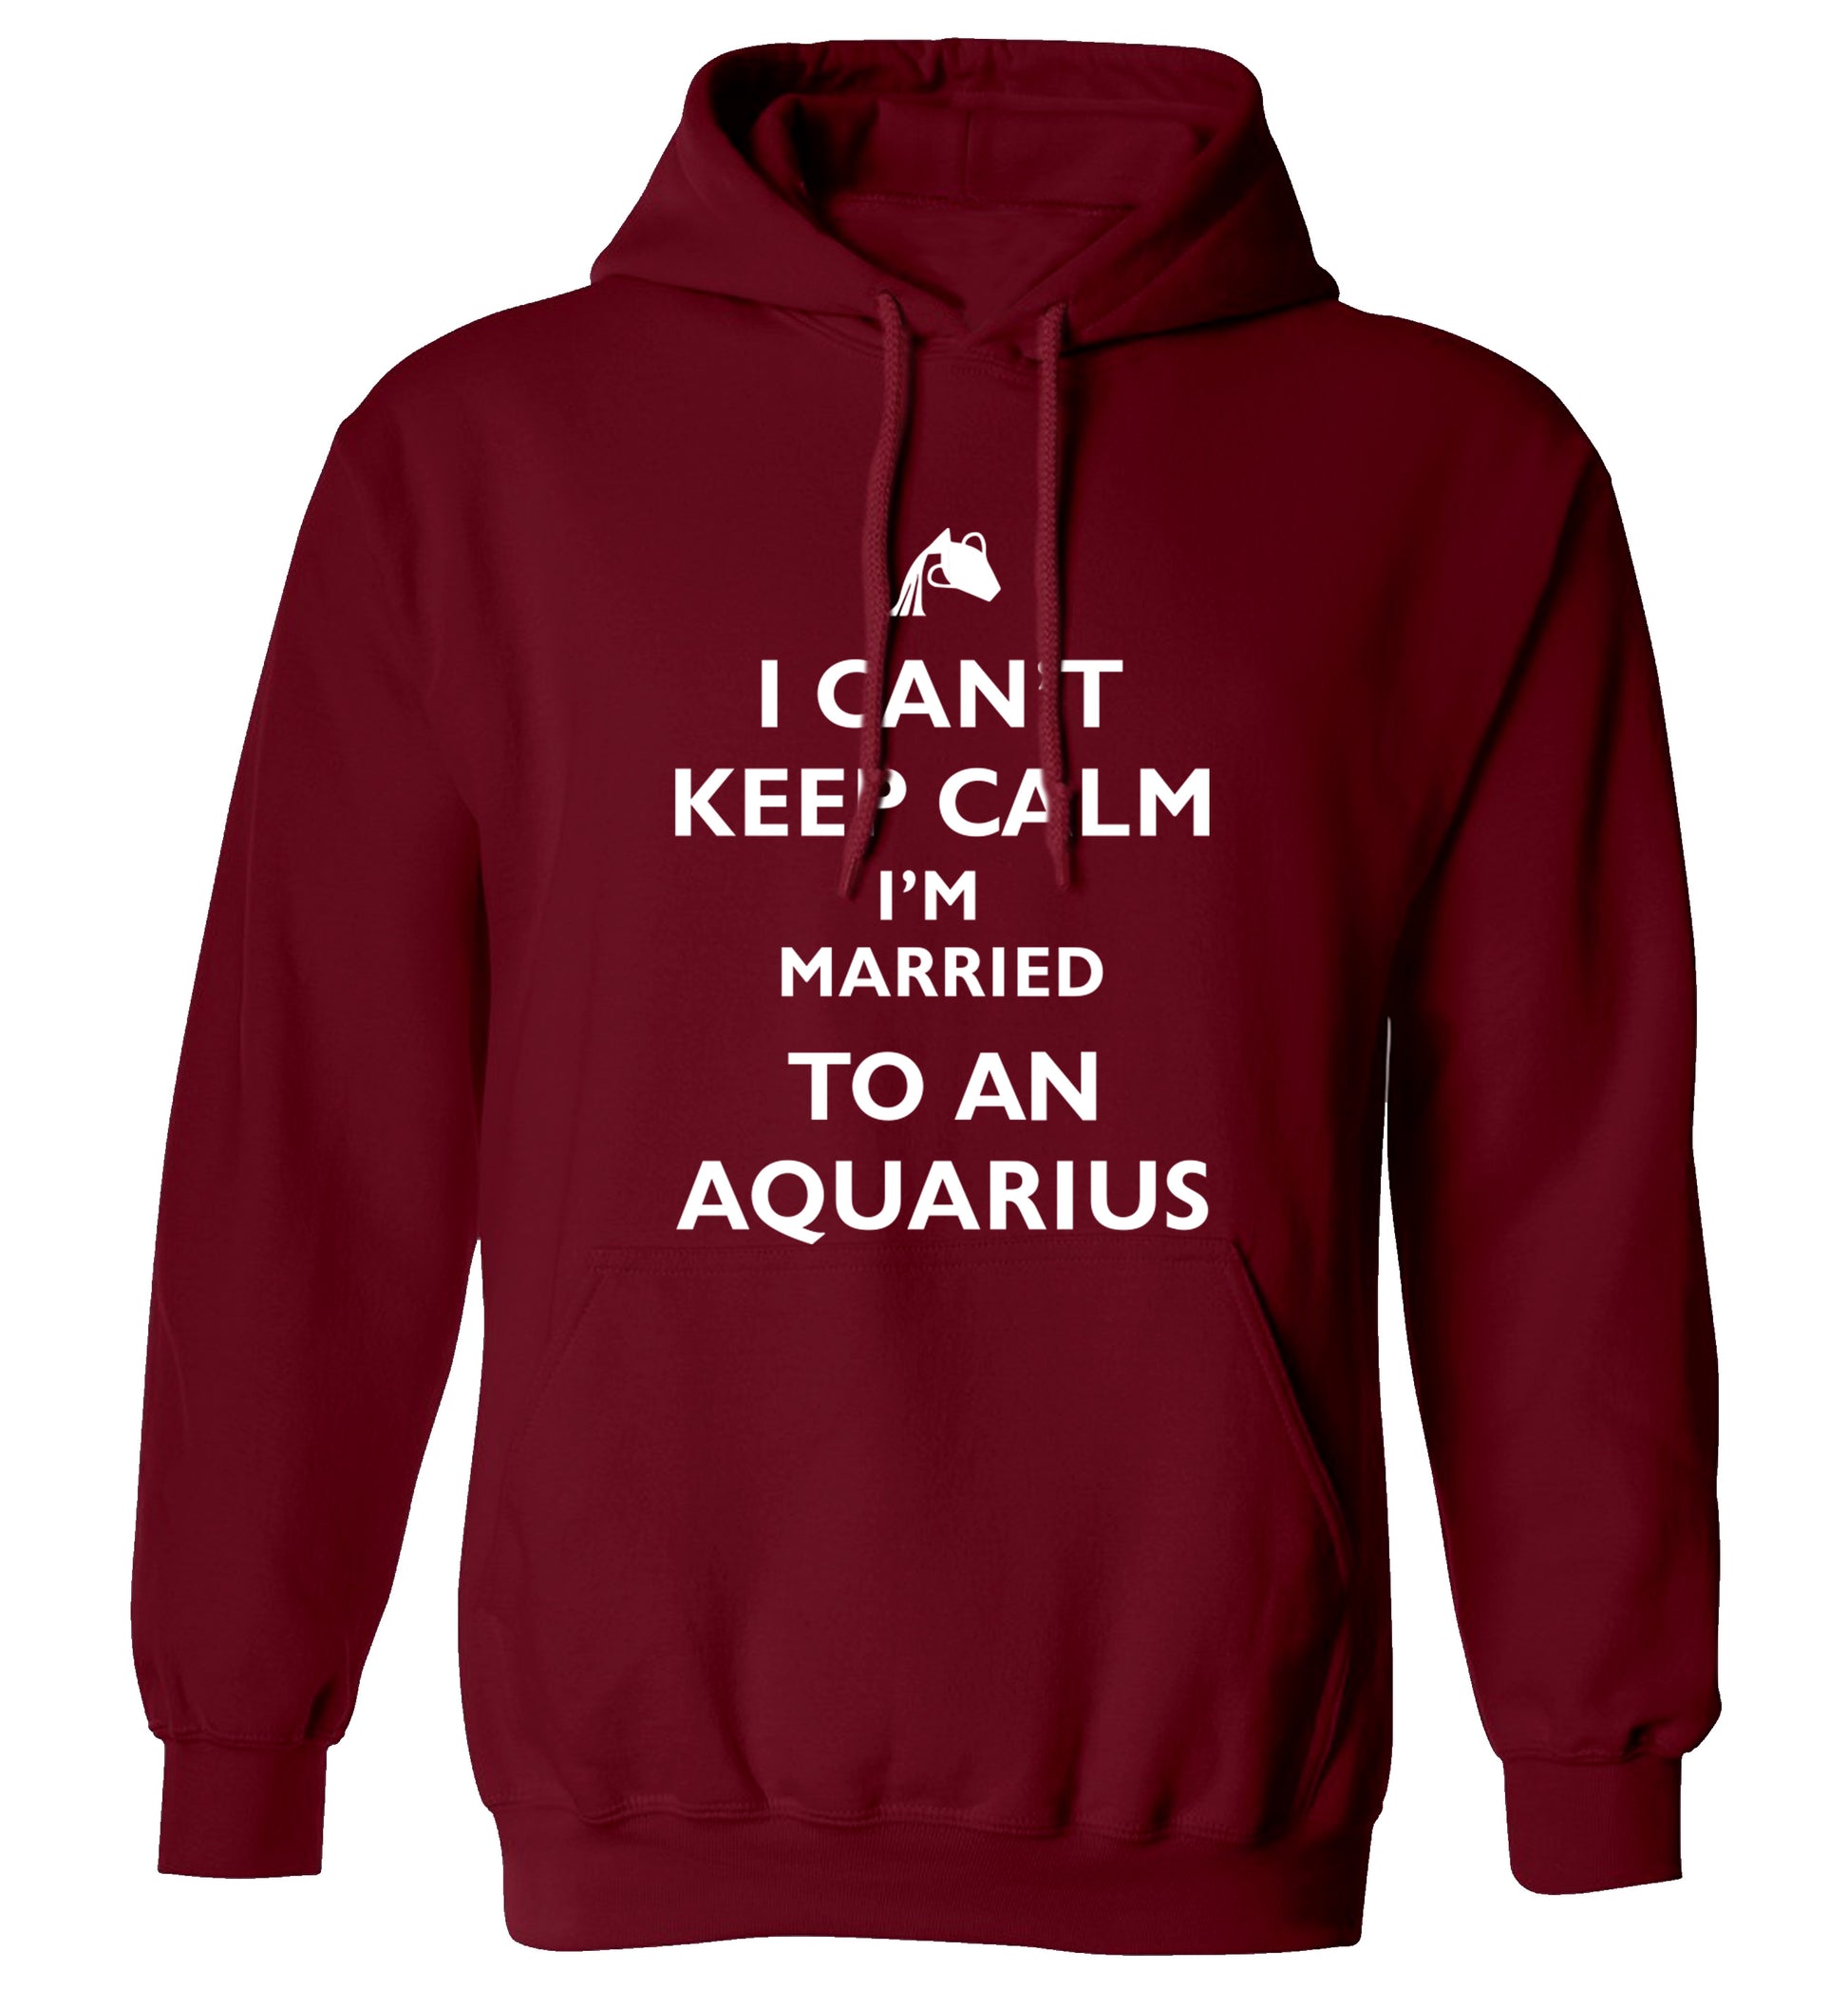 I can't keep calm I'm married to an aquarius adults unisex maroon hoodie 2XL